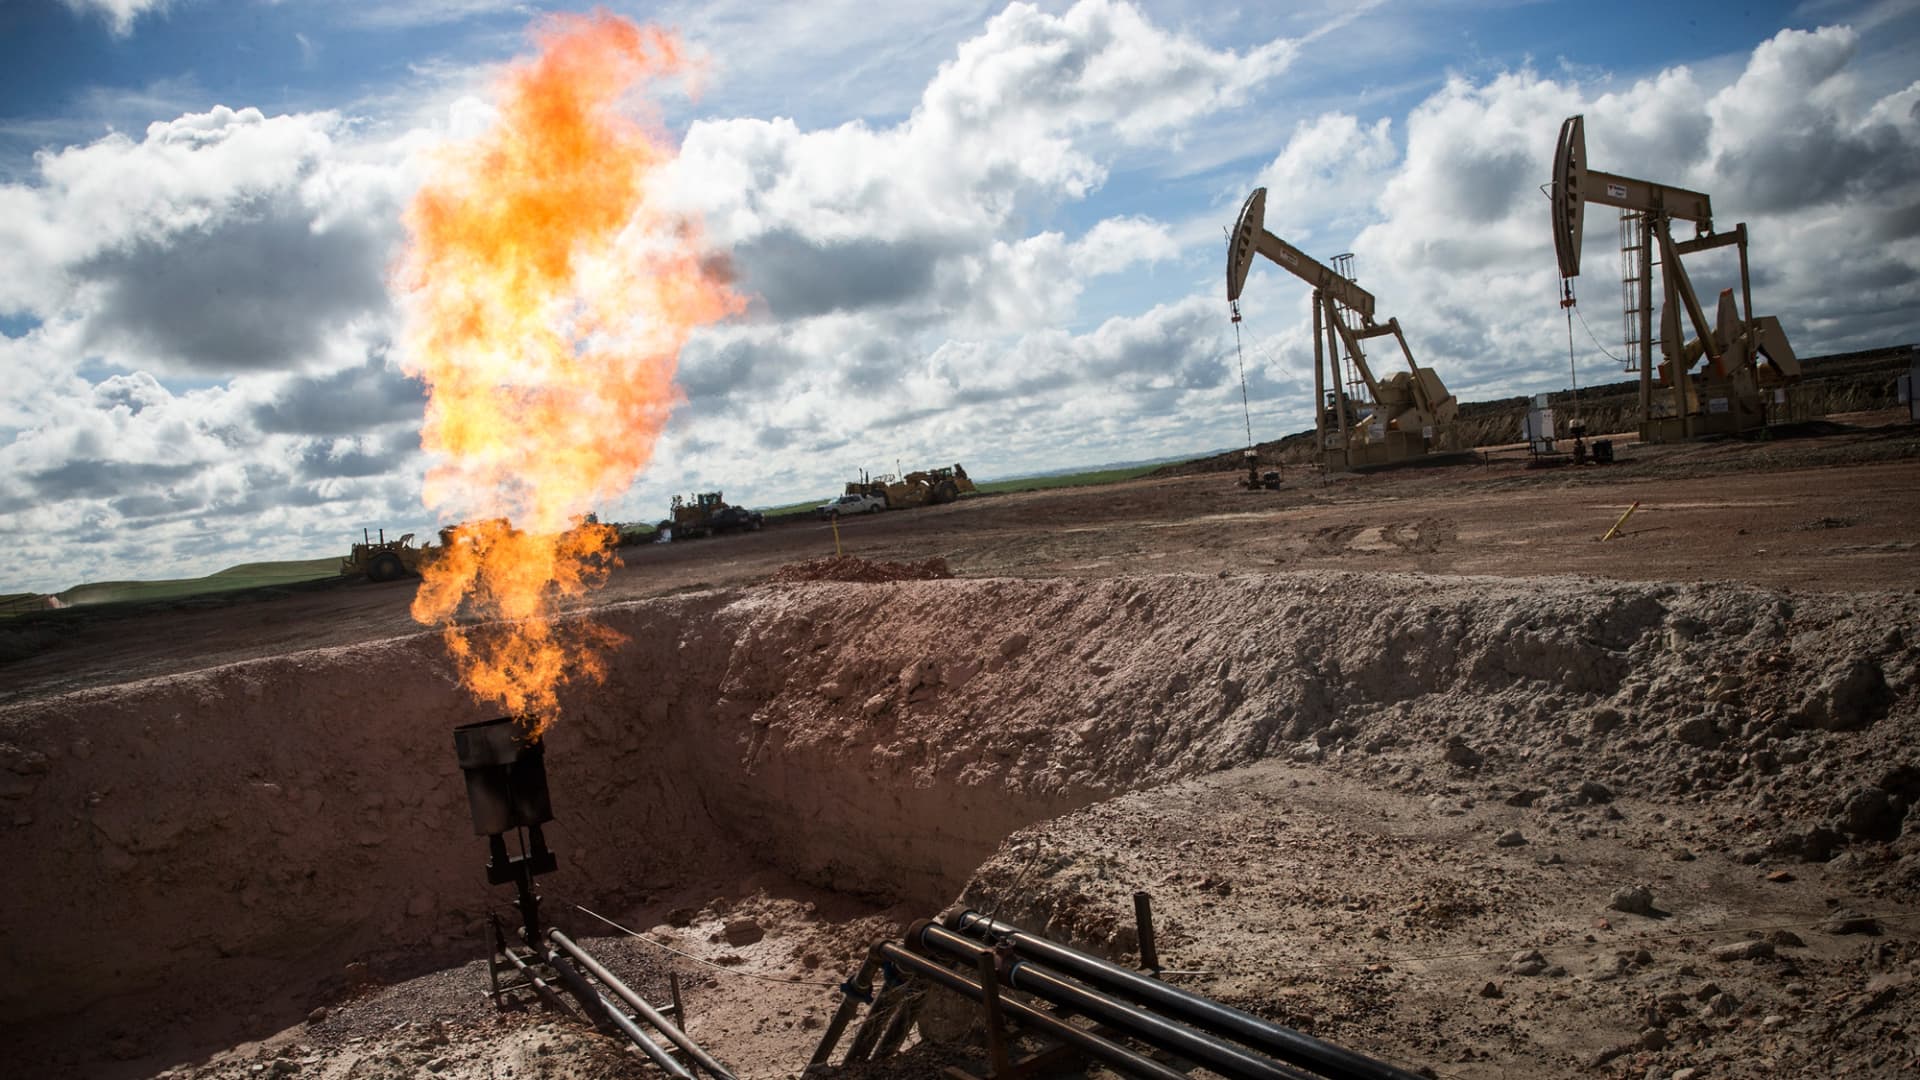 Democrats urge EPA to tighten gas flaring restrictions to curb methane emissions